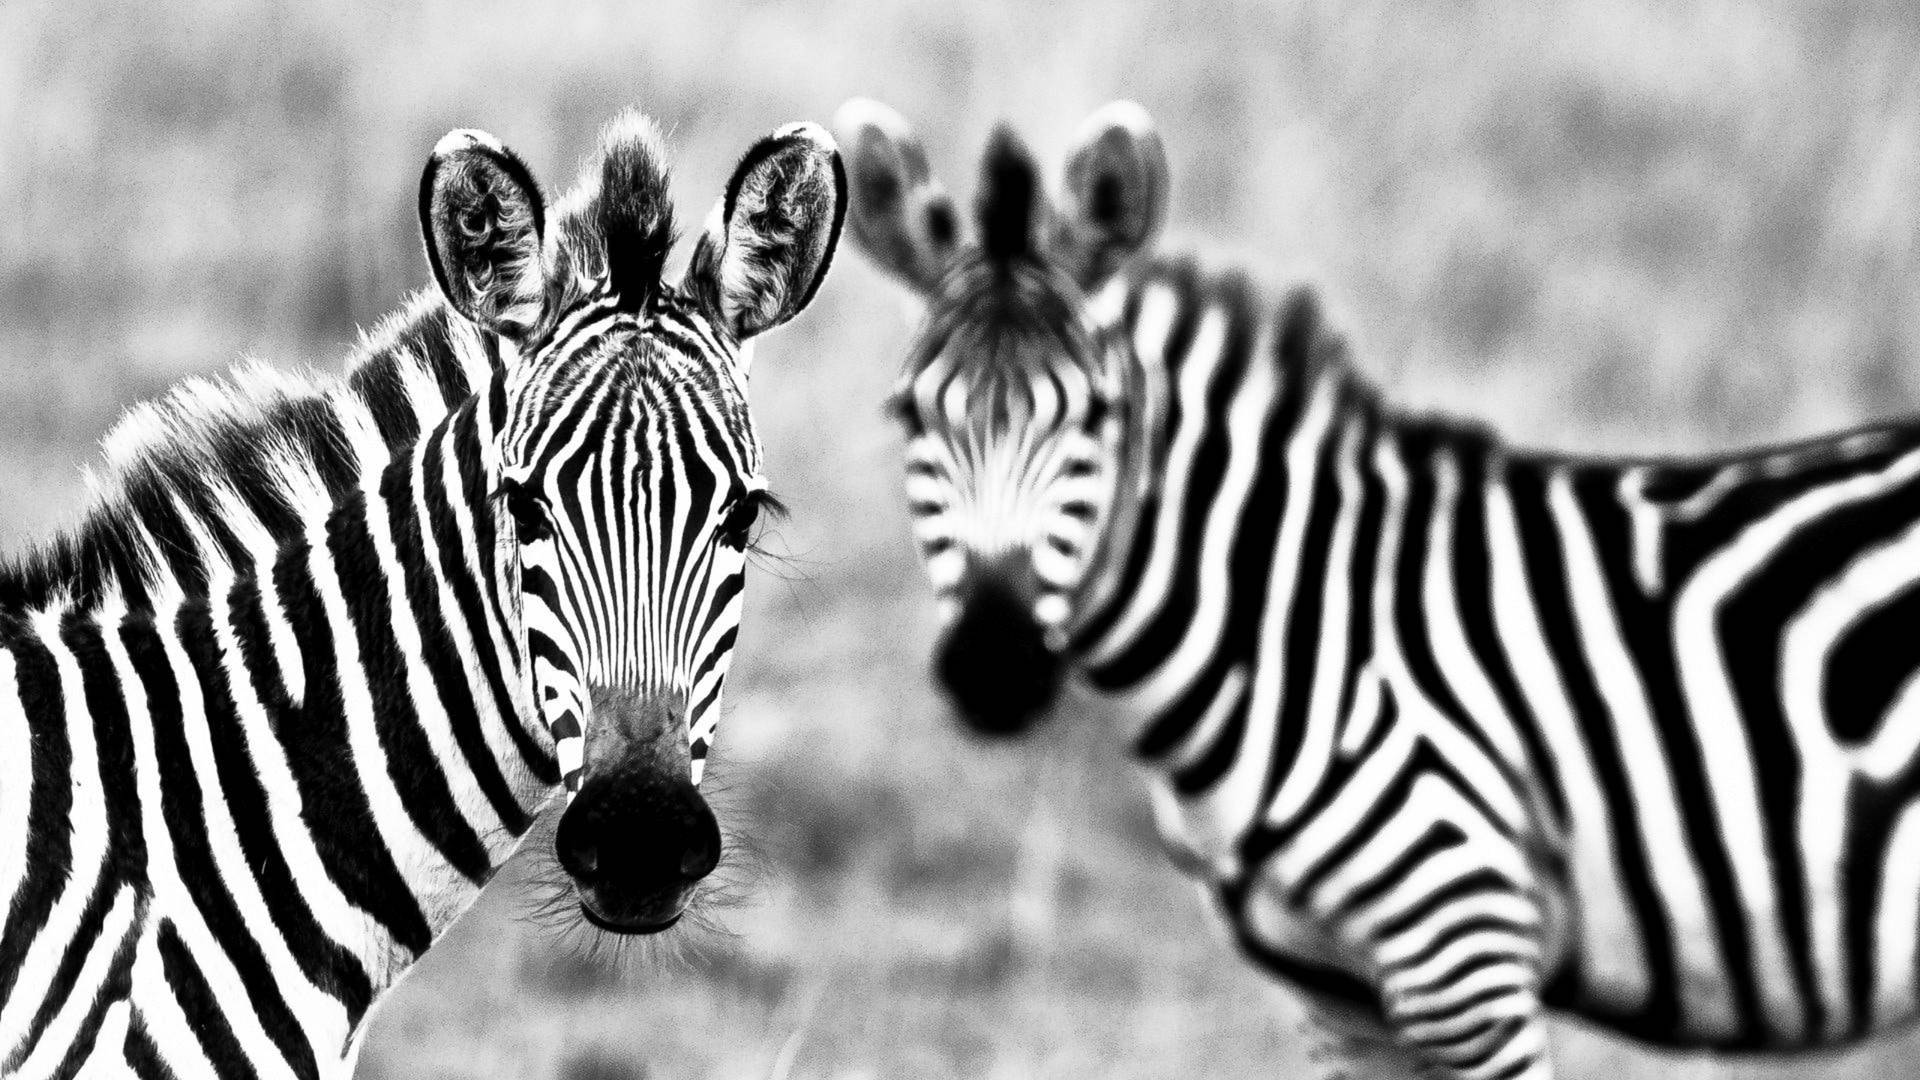 Two Zebras In Black And White